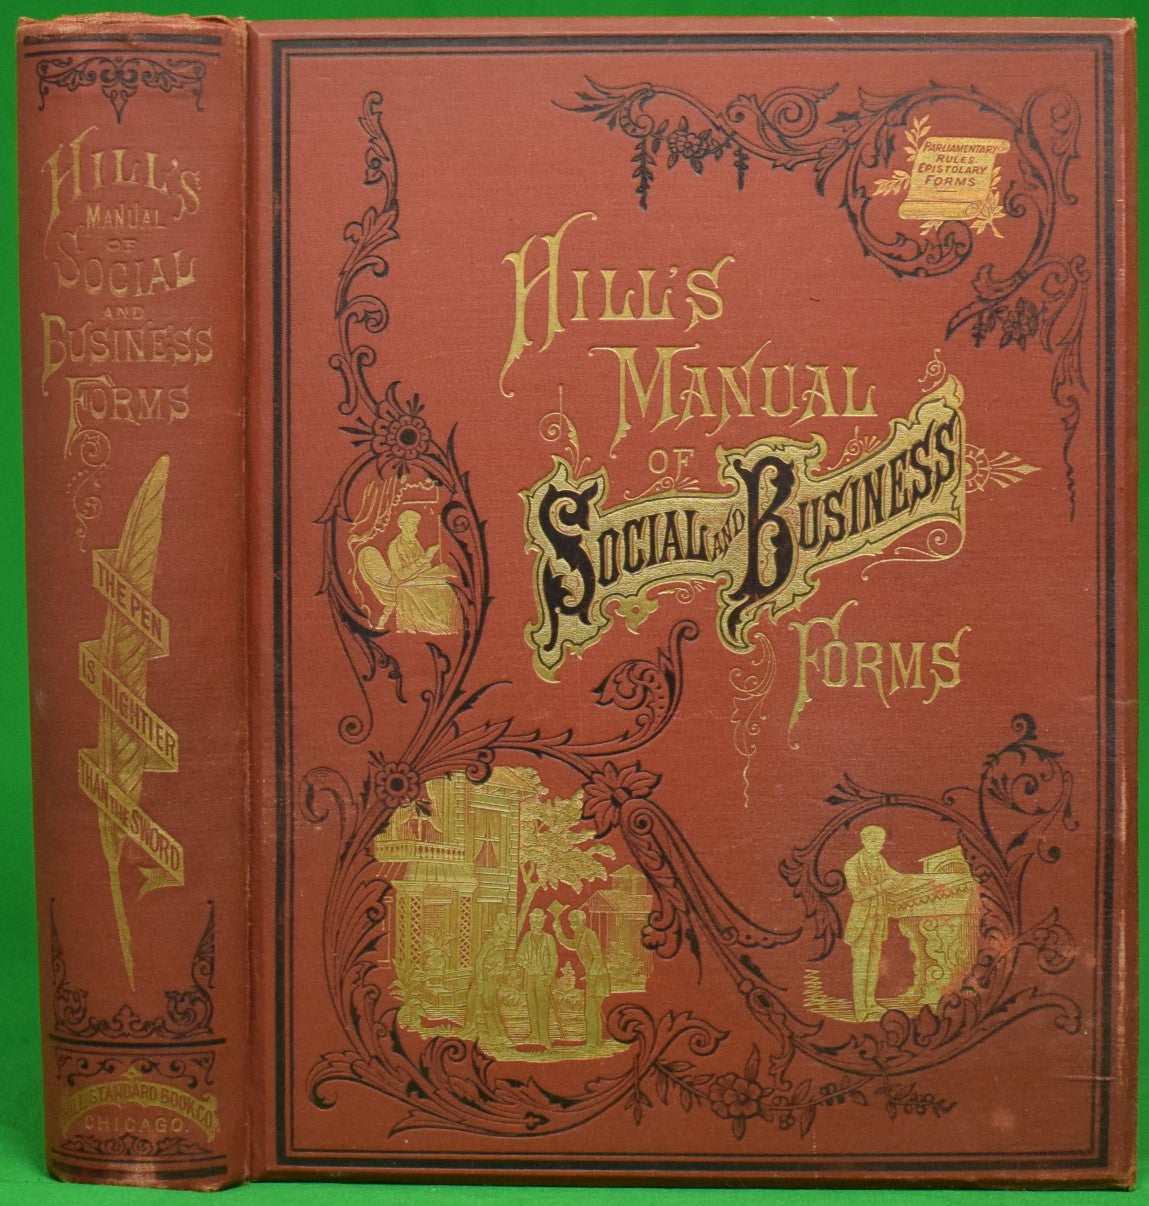 "Hill's Manual Of Social And Business Forms" 1889 HILL, Thos E. (SOLD)